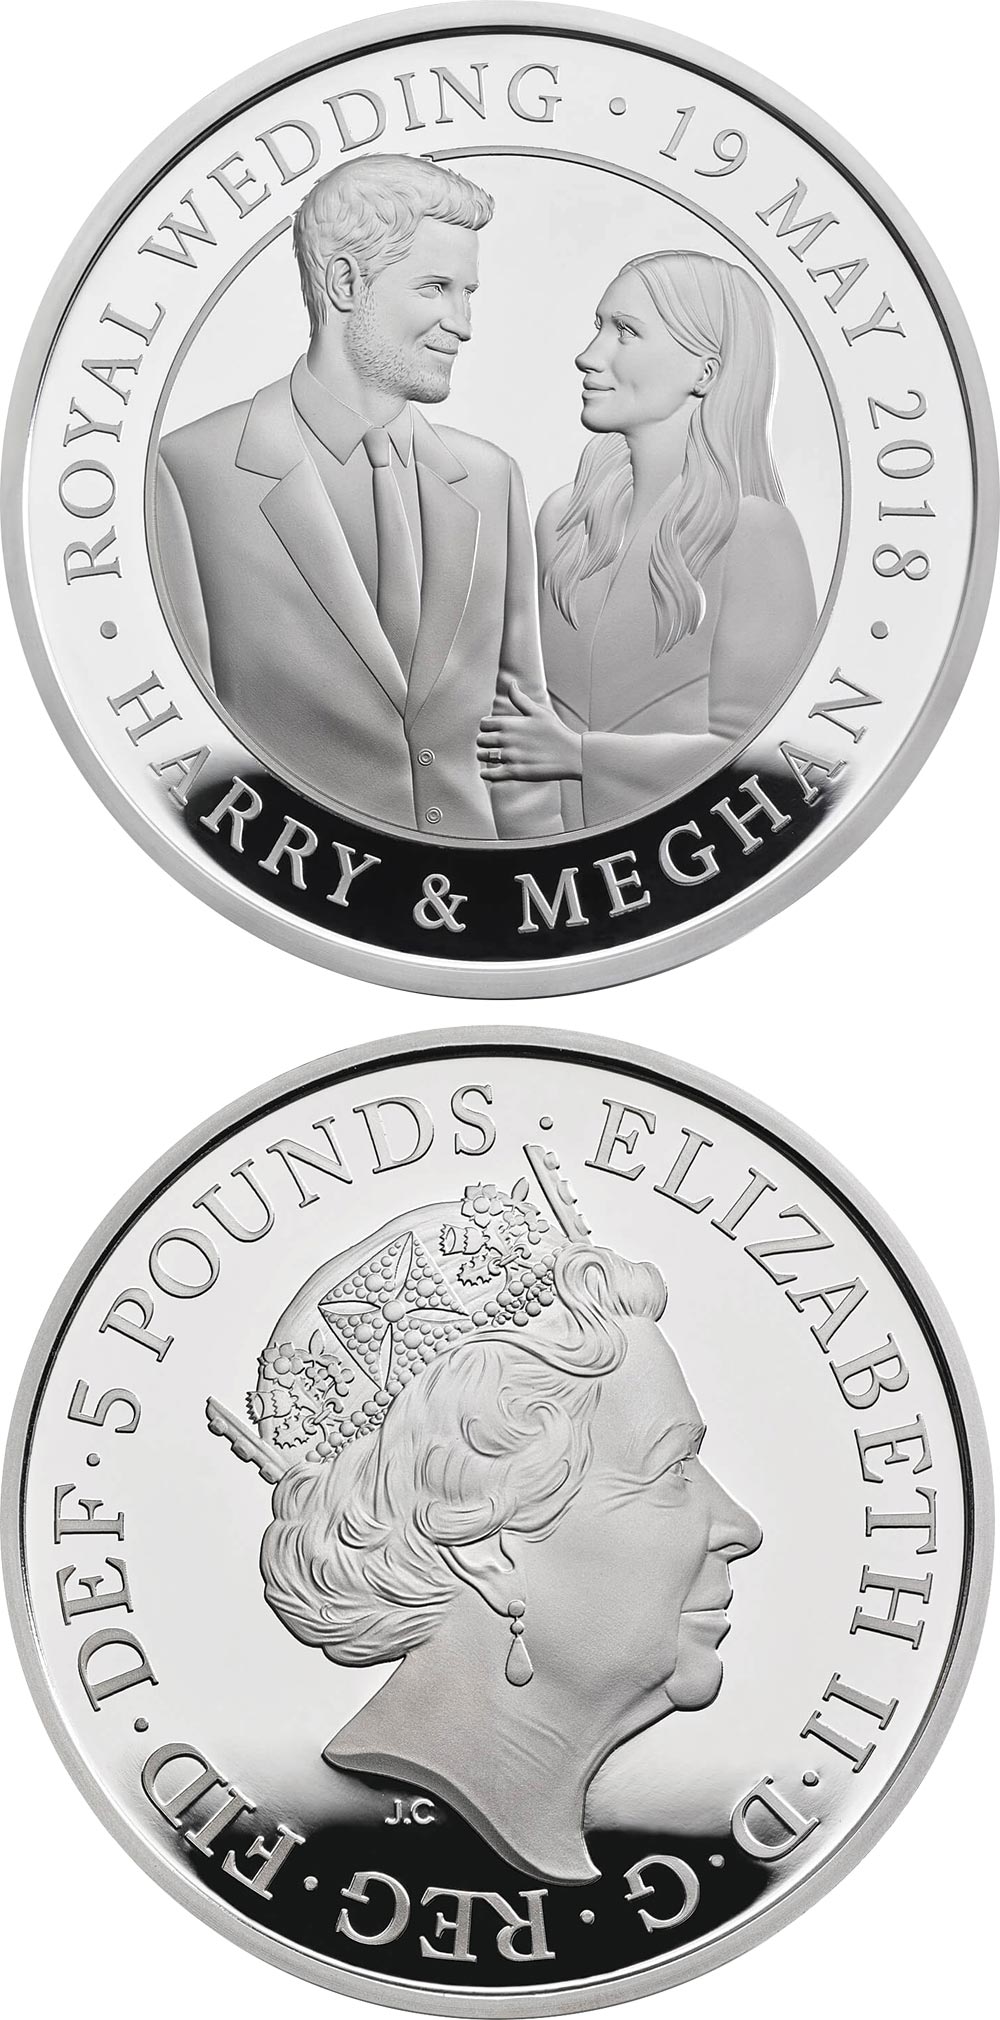 Image of 5 pounds coin - The Royal Wedding | United Kingdom 2018.  The Copper–Nickel (CuNi) coin is of Proof, BU quality.